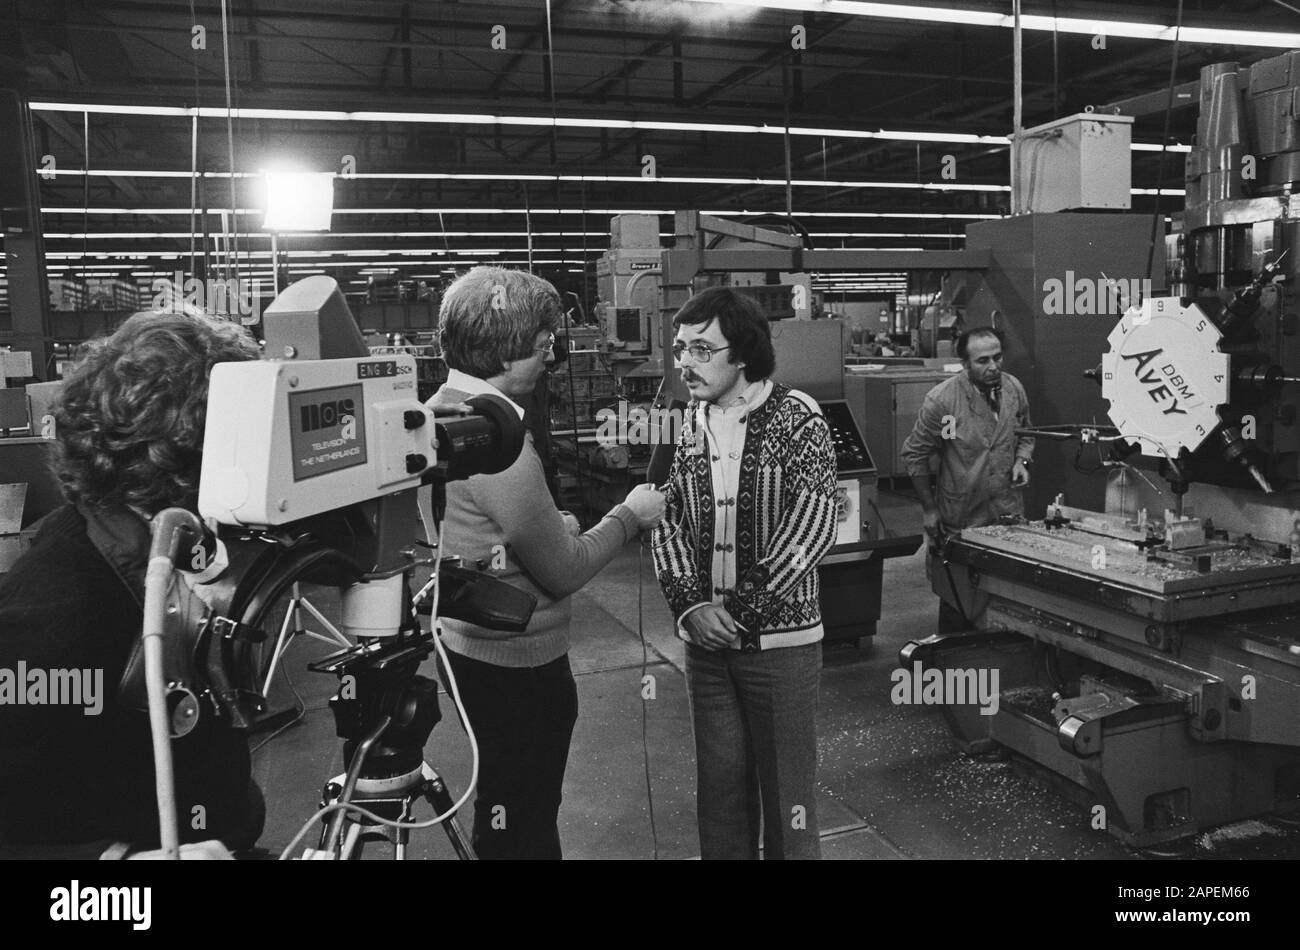 Occupation Tealtronic; NOS filming in factory hall Date: 10 January 1977 Keywords: occupancy, films Institution name: NOS Stock Photo